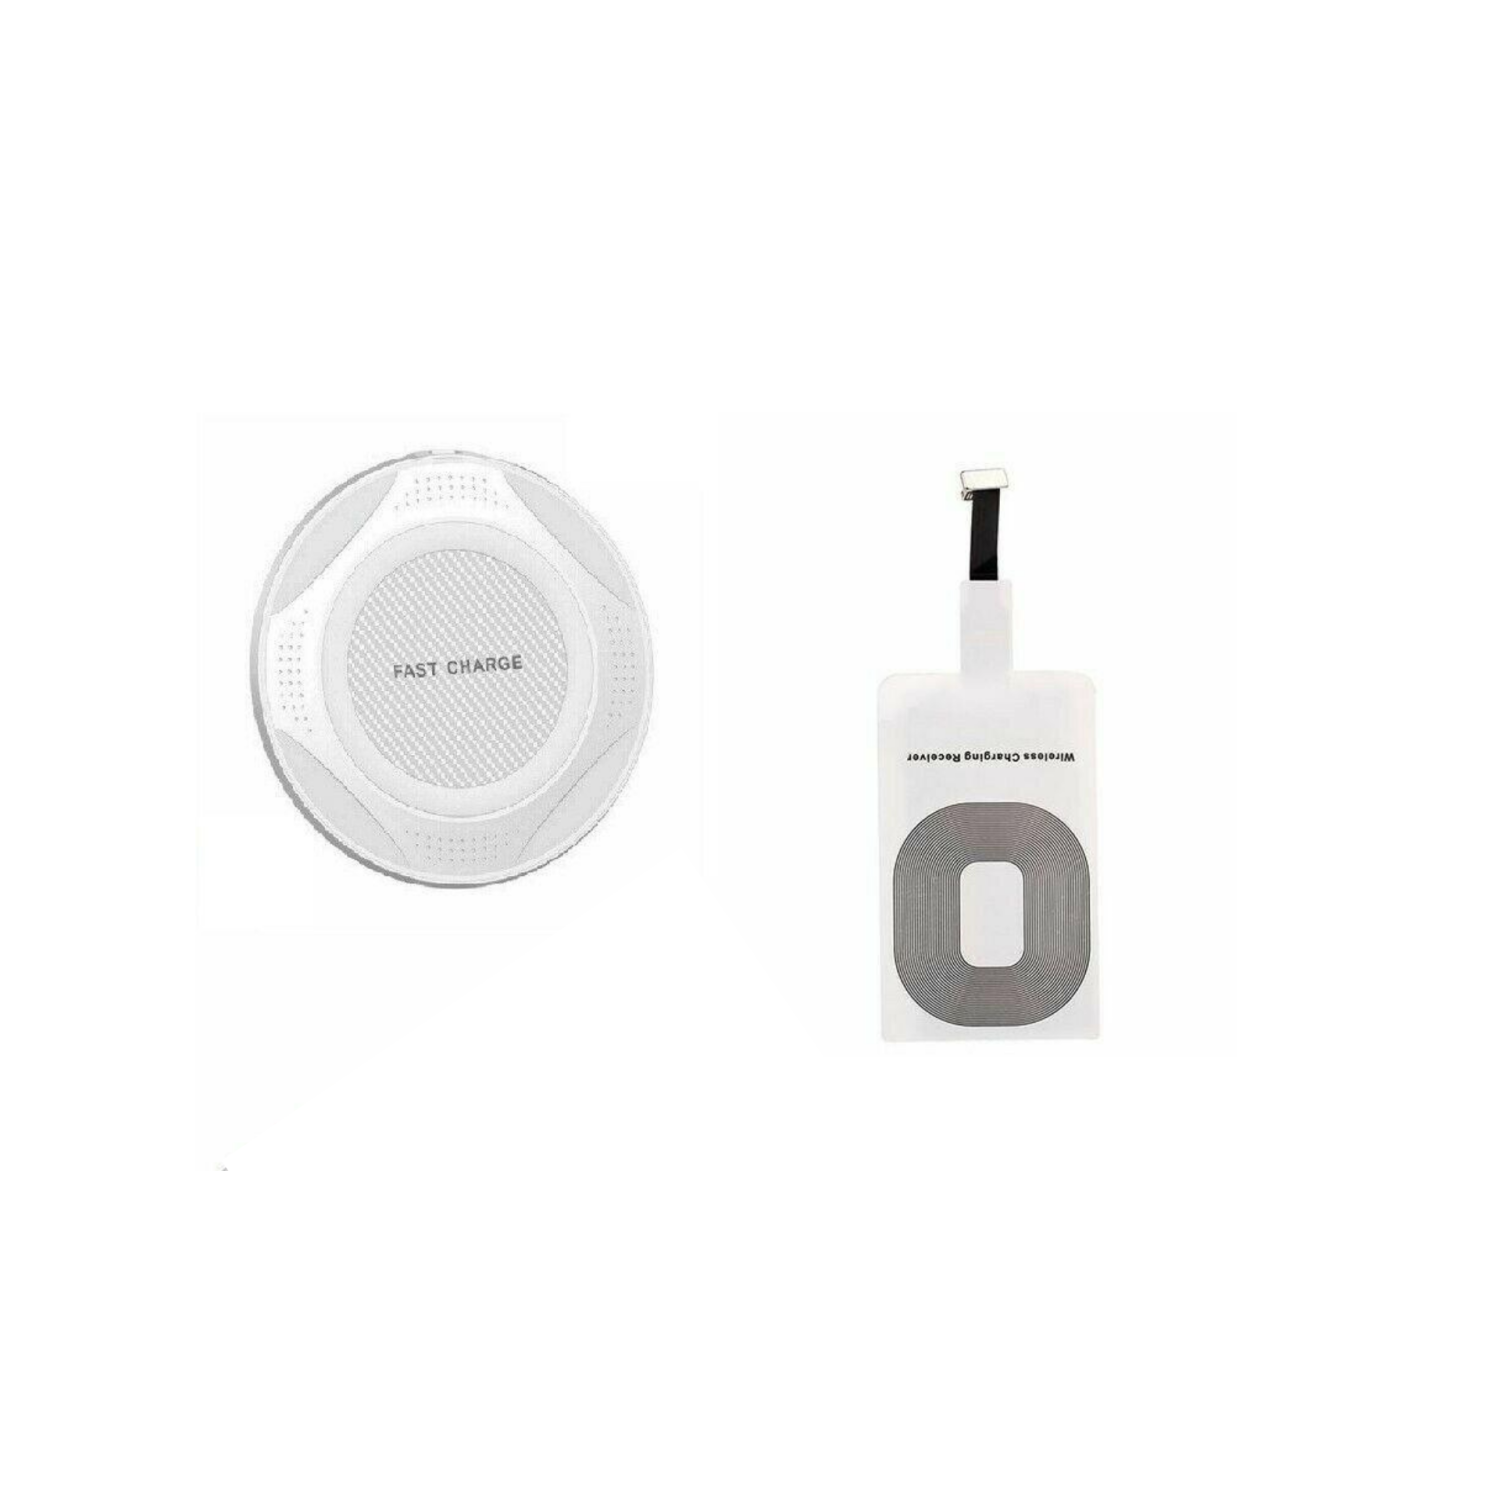 Qi Wireless Charger Charging Receiver Pad + Station for iPhone 5 5S 6 6S 7 PLUS